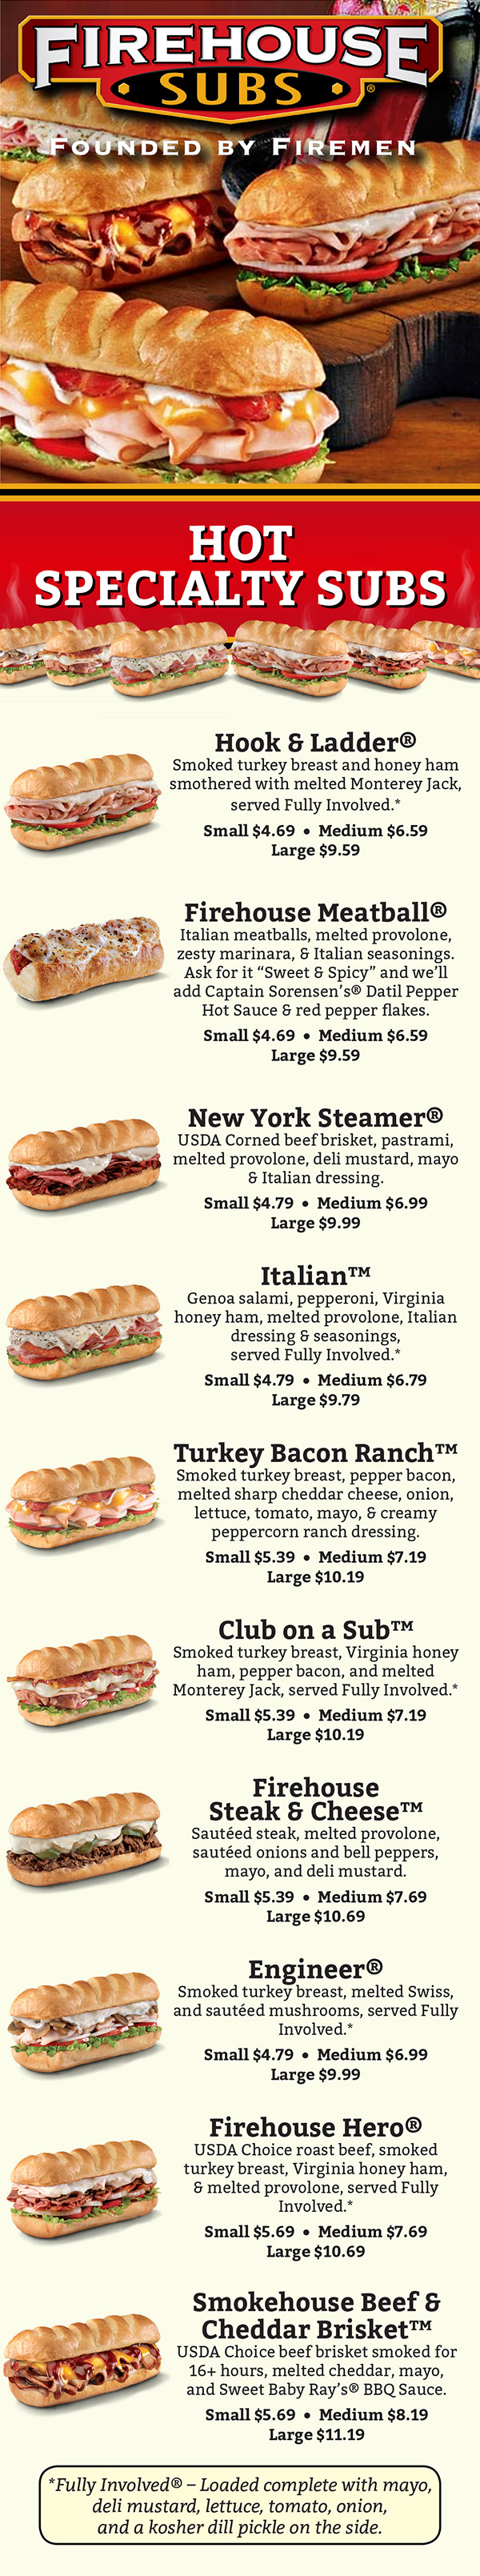 firehouse subs prices